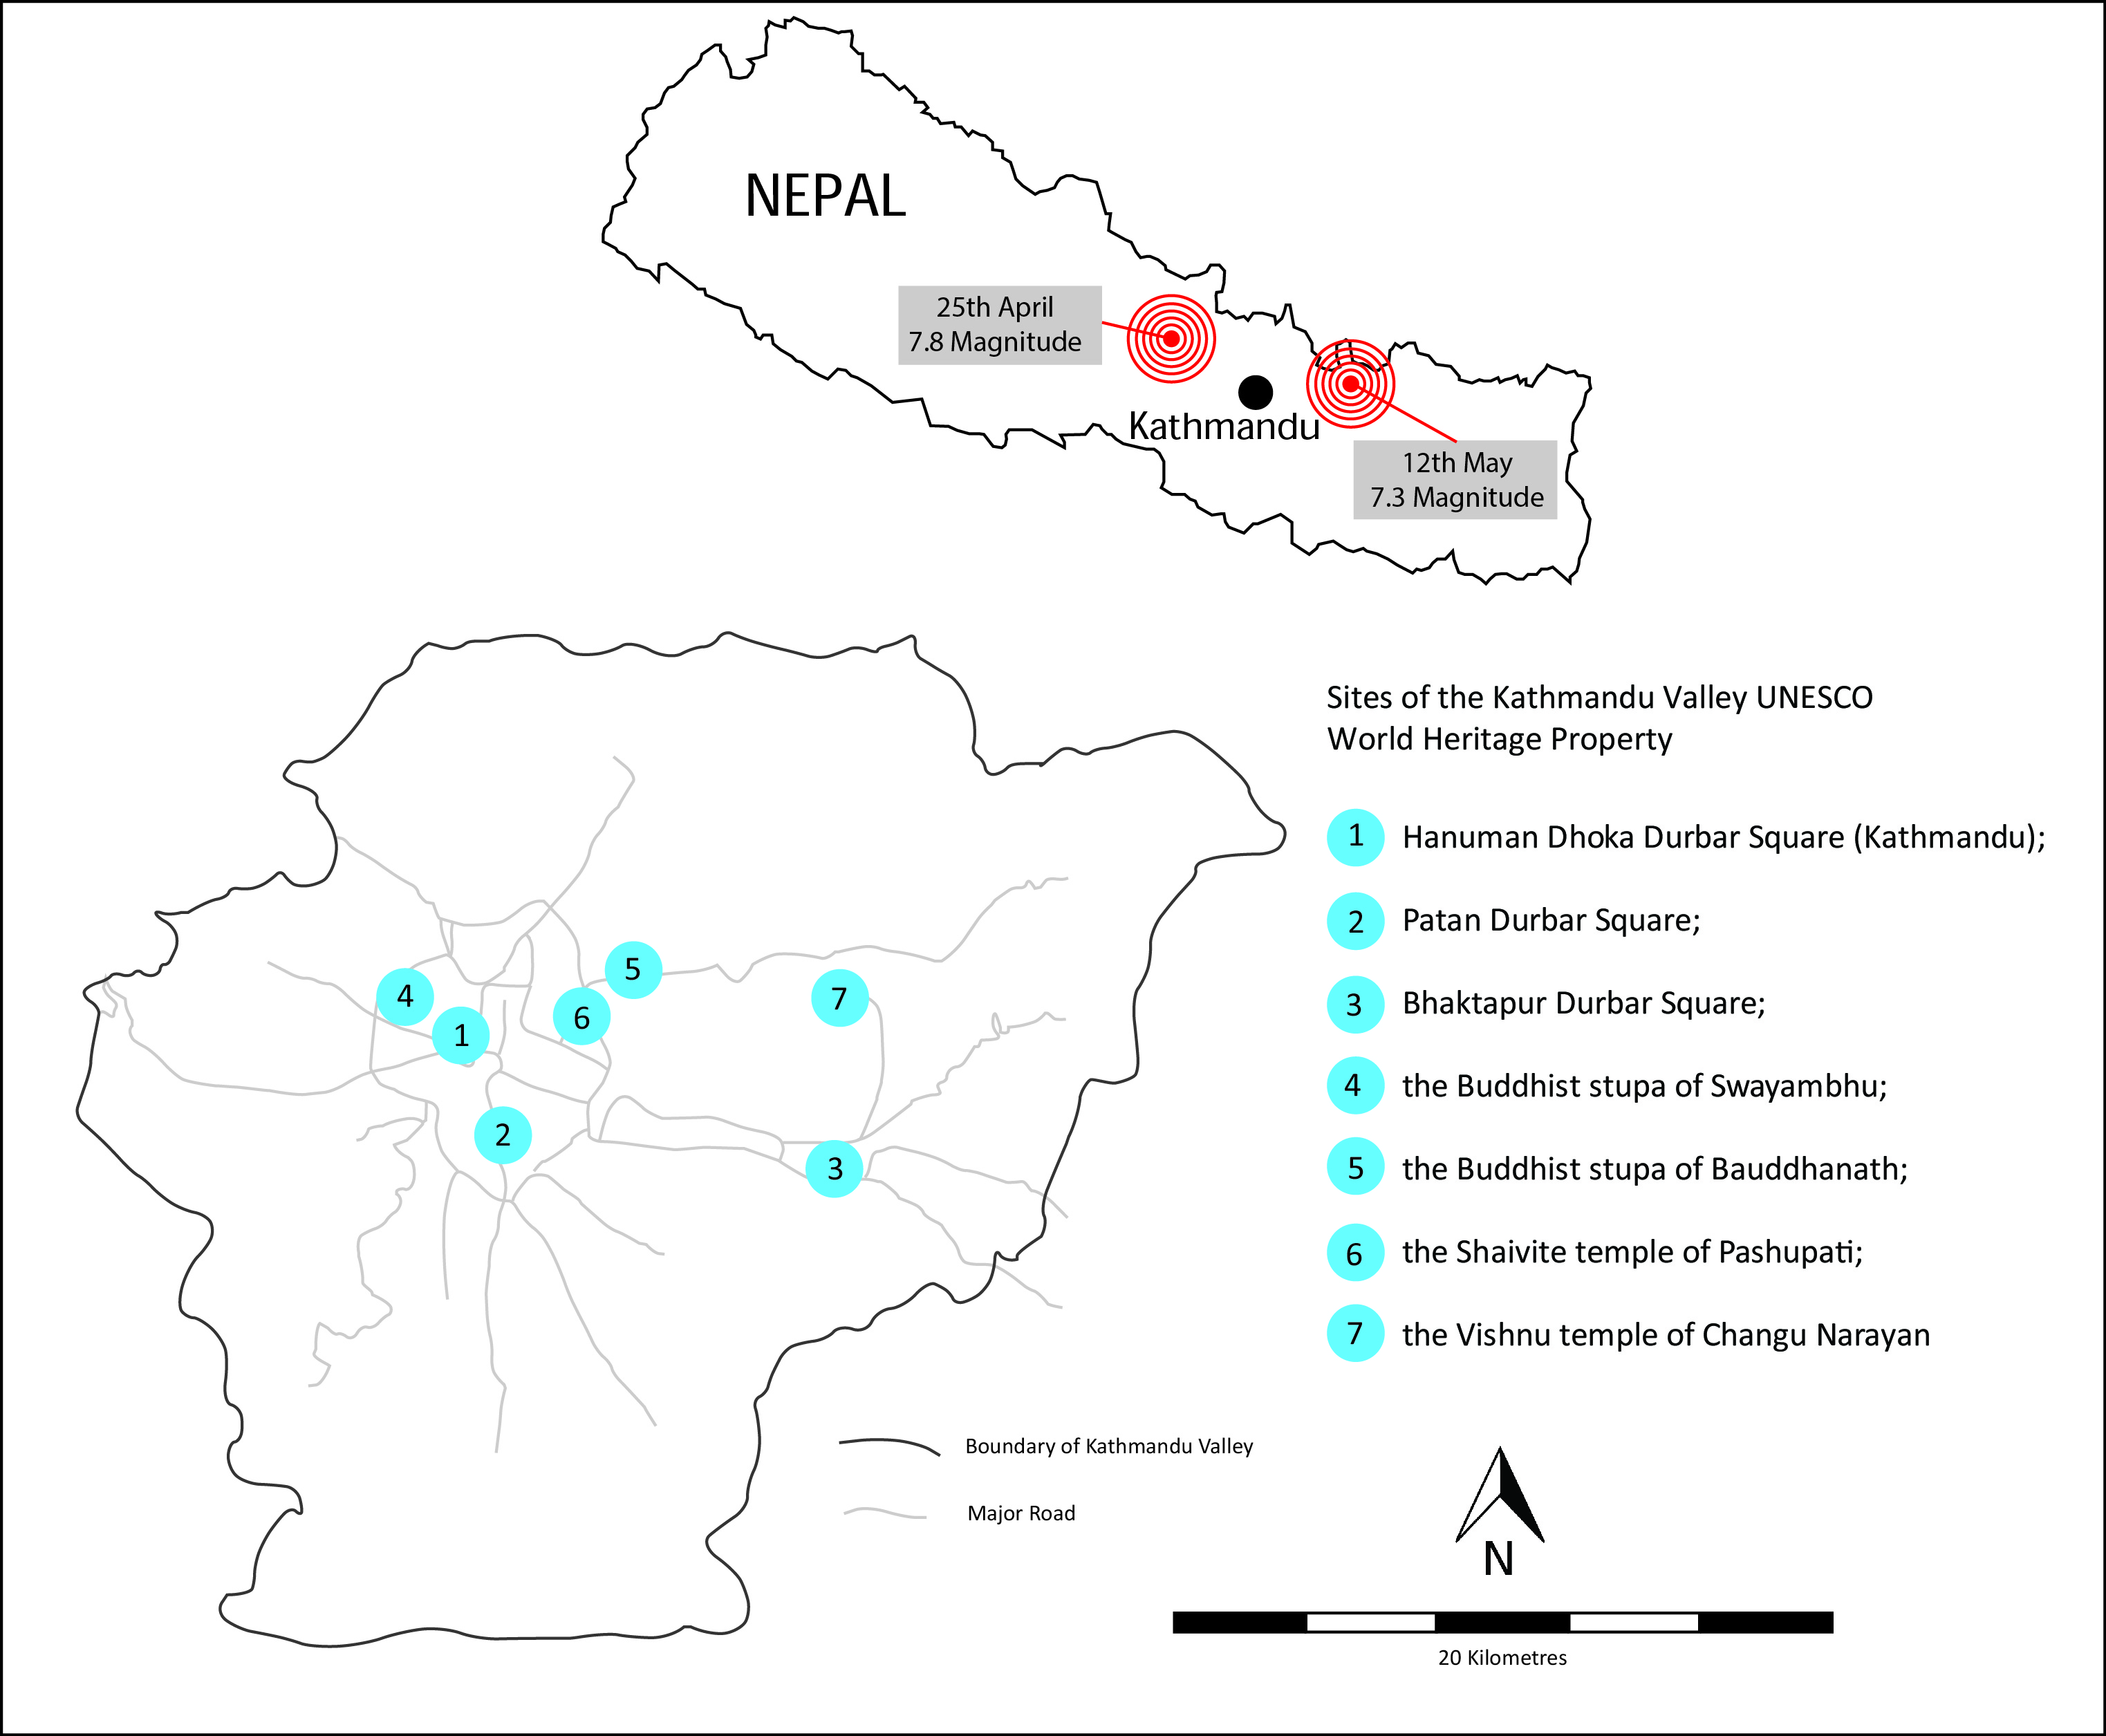 A map of World Heritage Site properties within the Kathmandu Valley